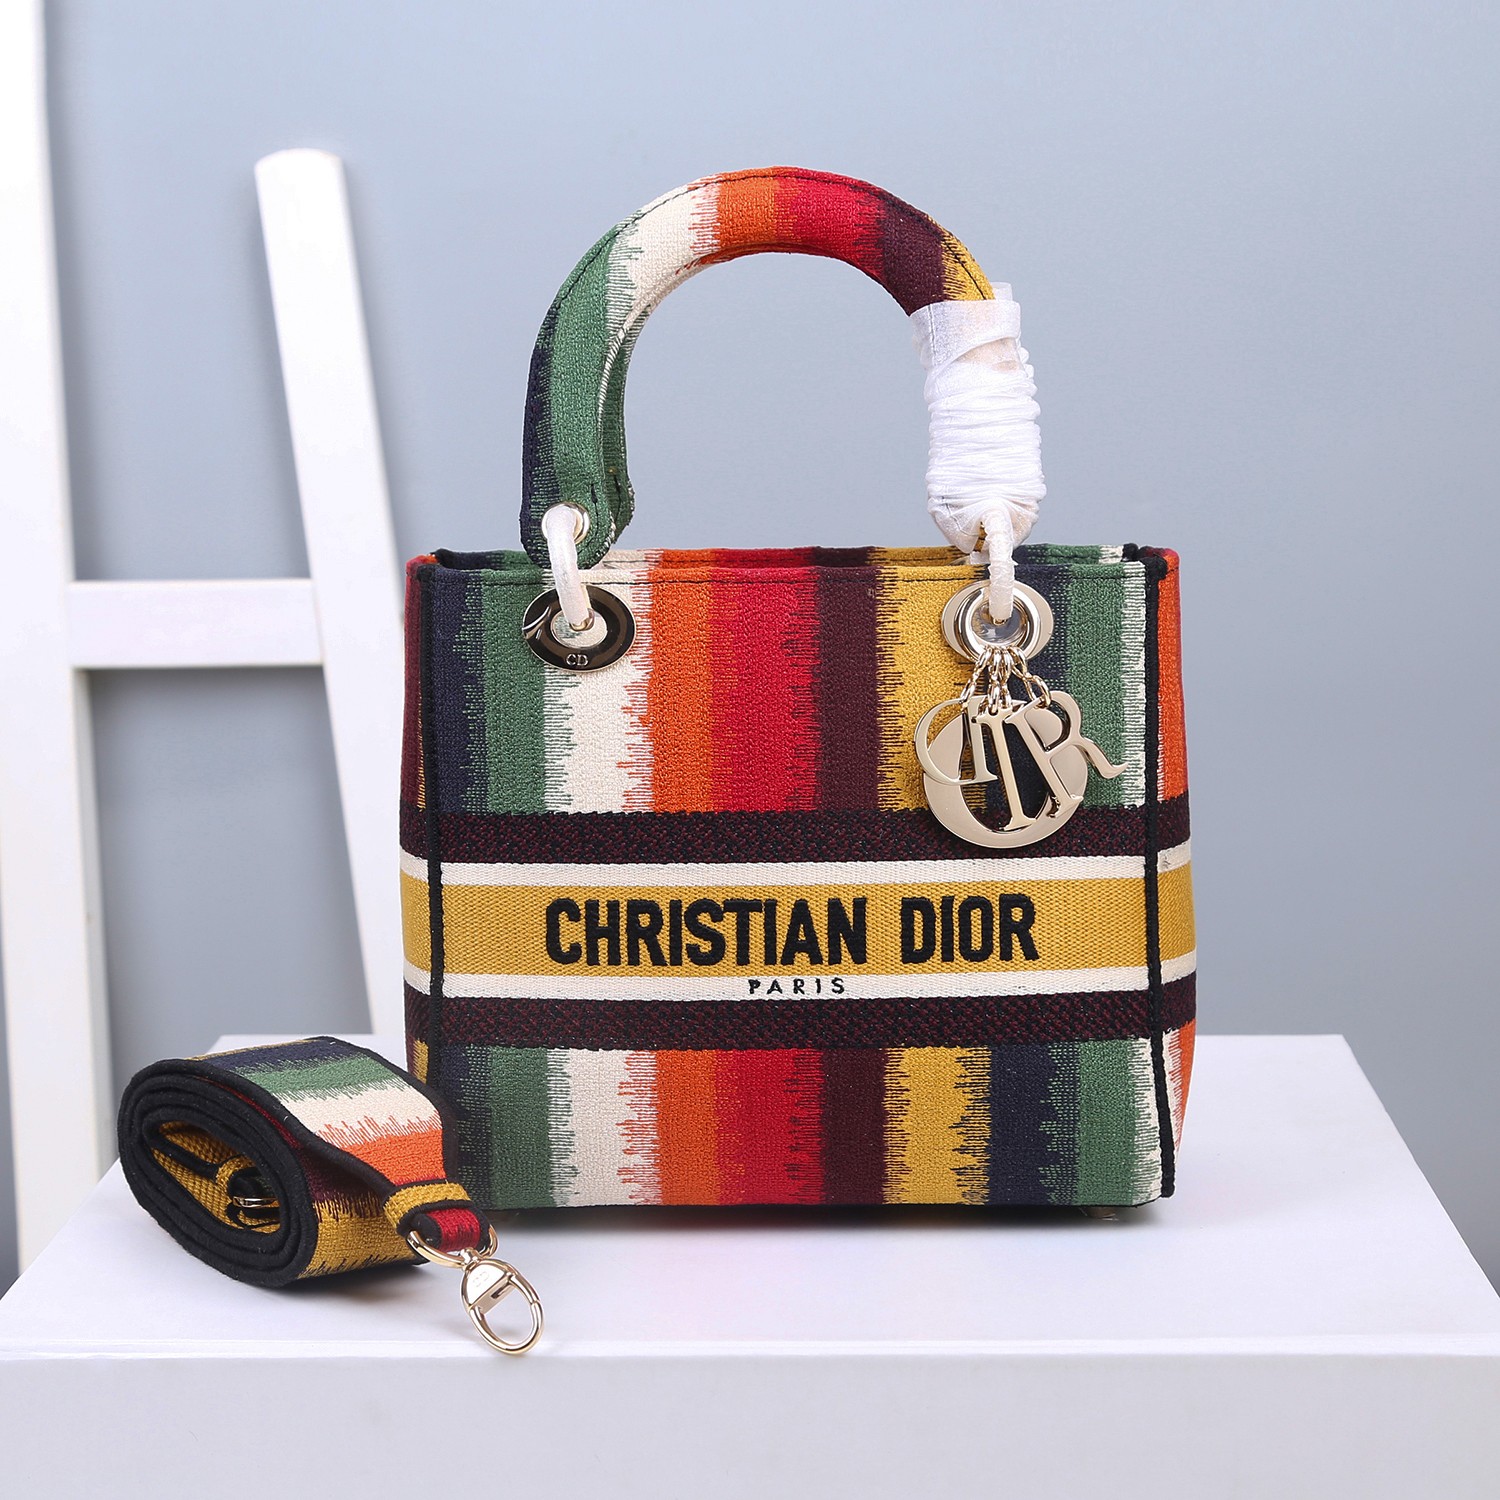 Dior Five panels of embroidered rainbow stripes